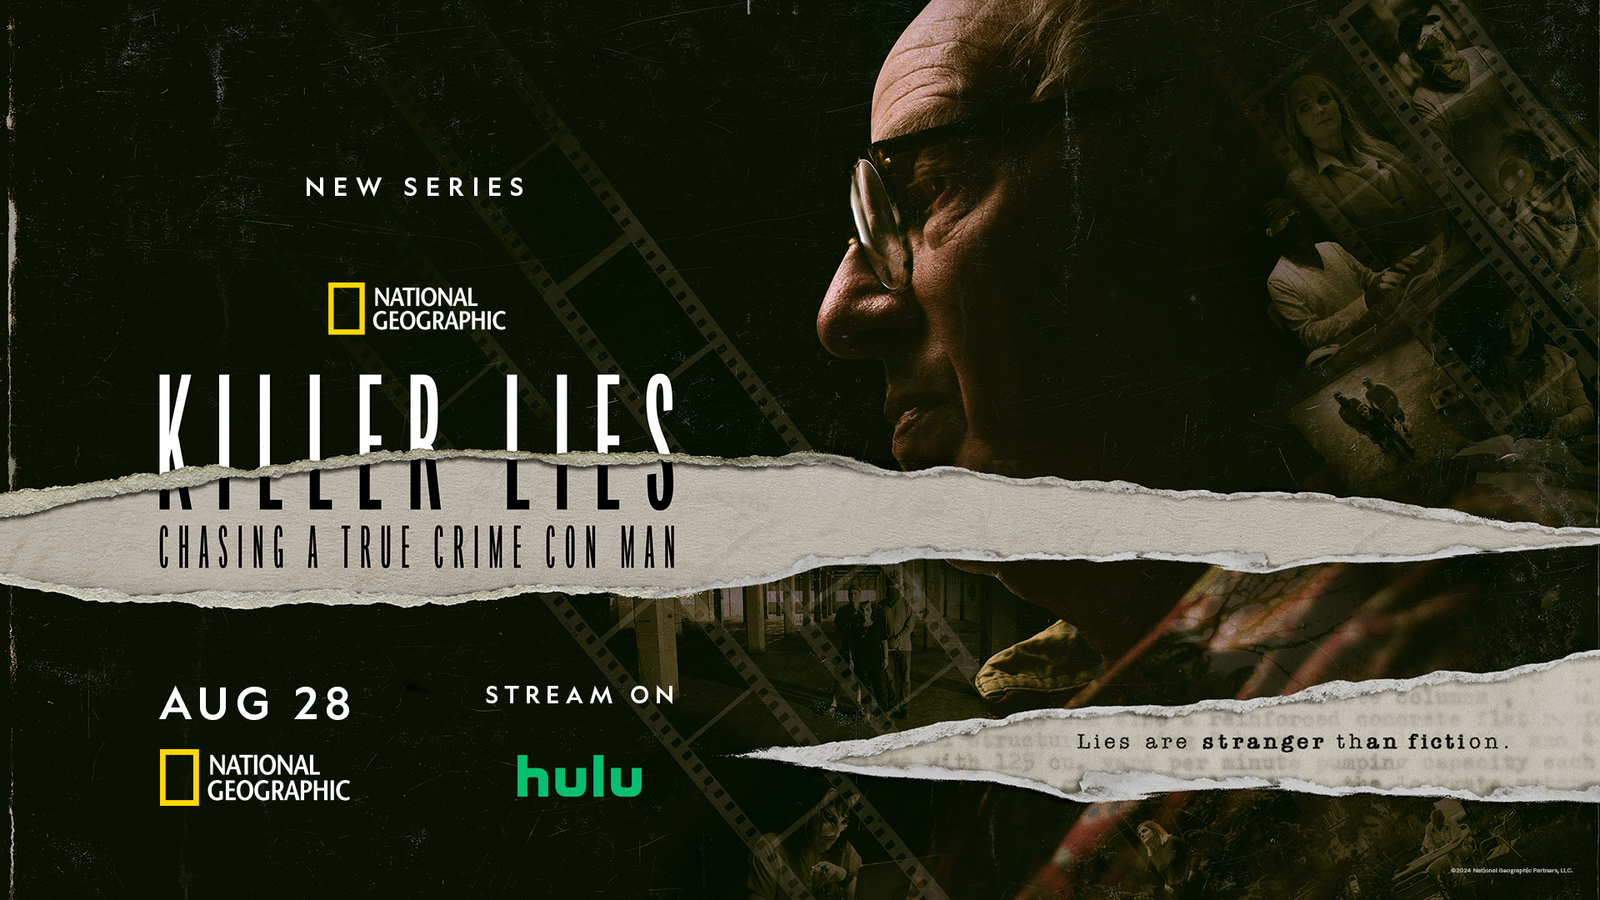 ‘Killer Lies: Chasing a True Crime Con Man’: a serial killer expert’s story unravels [Video]